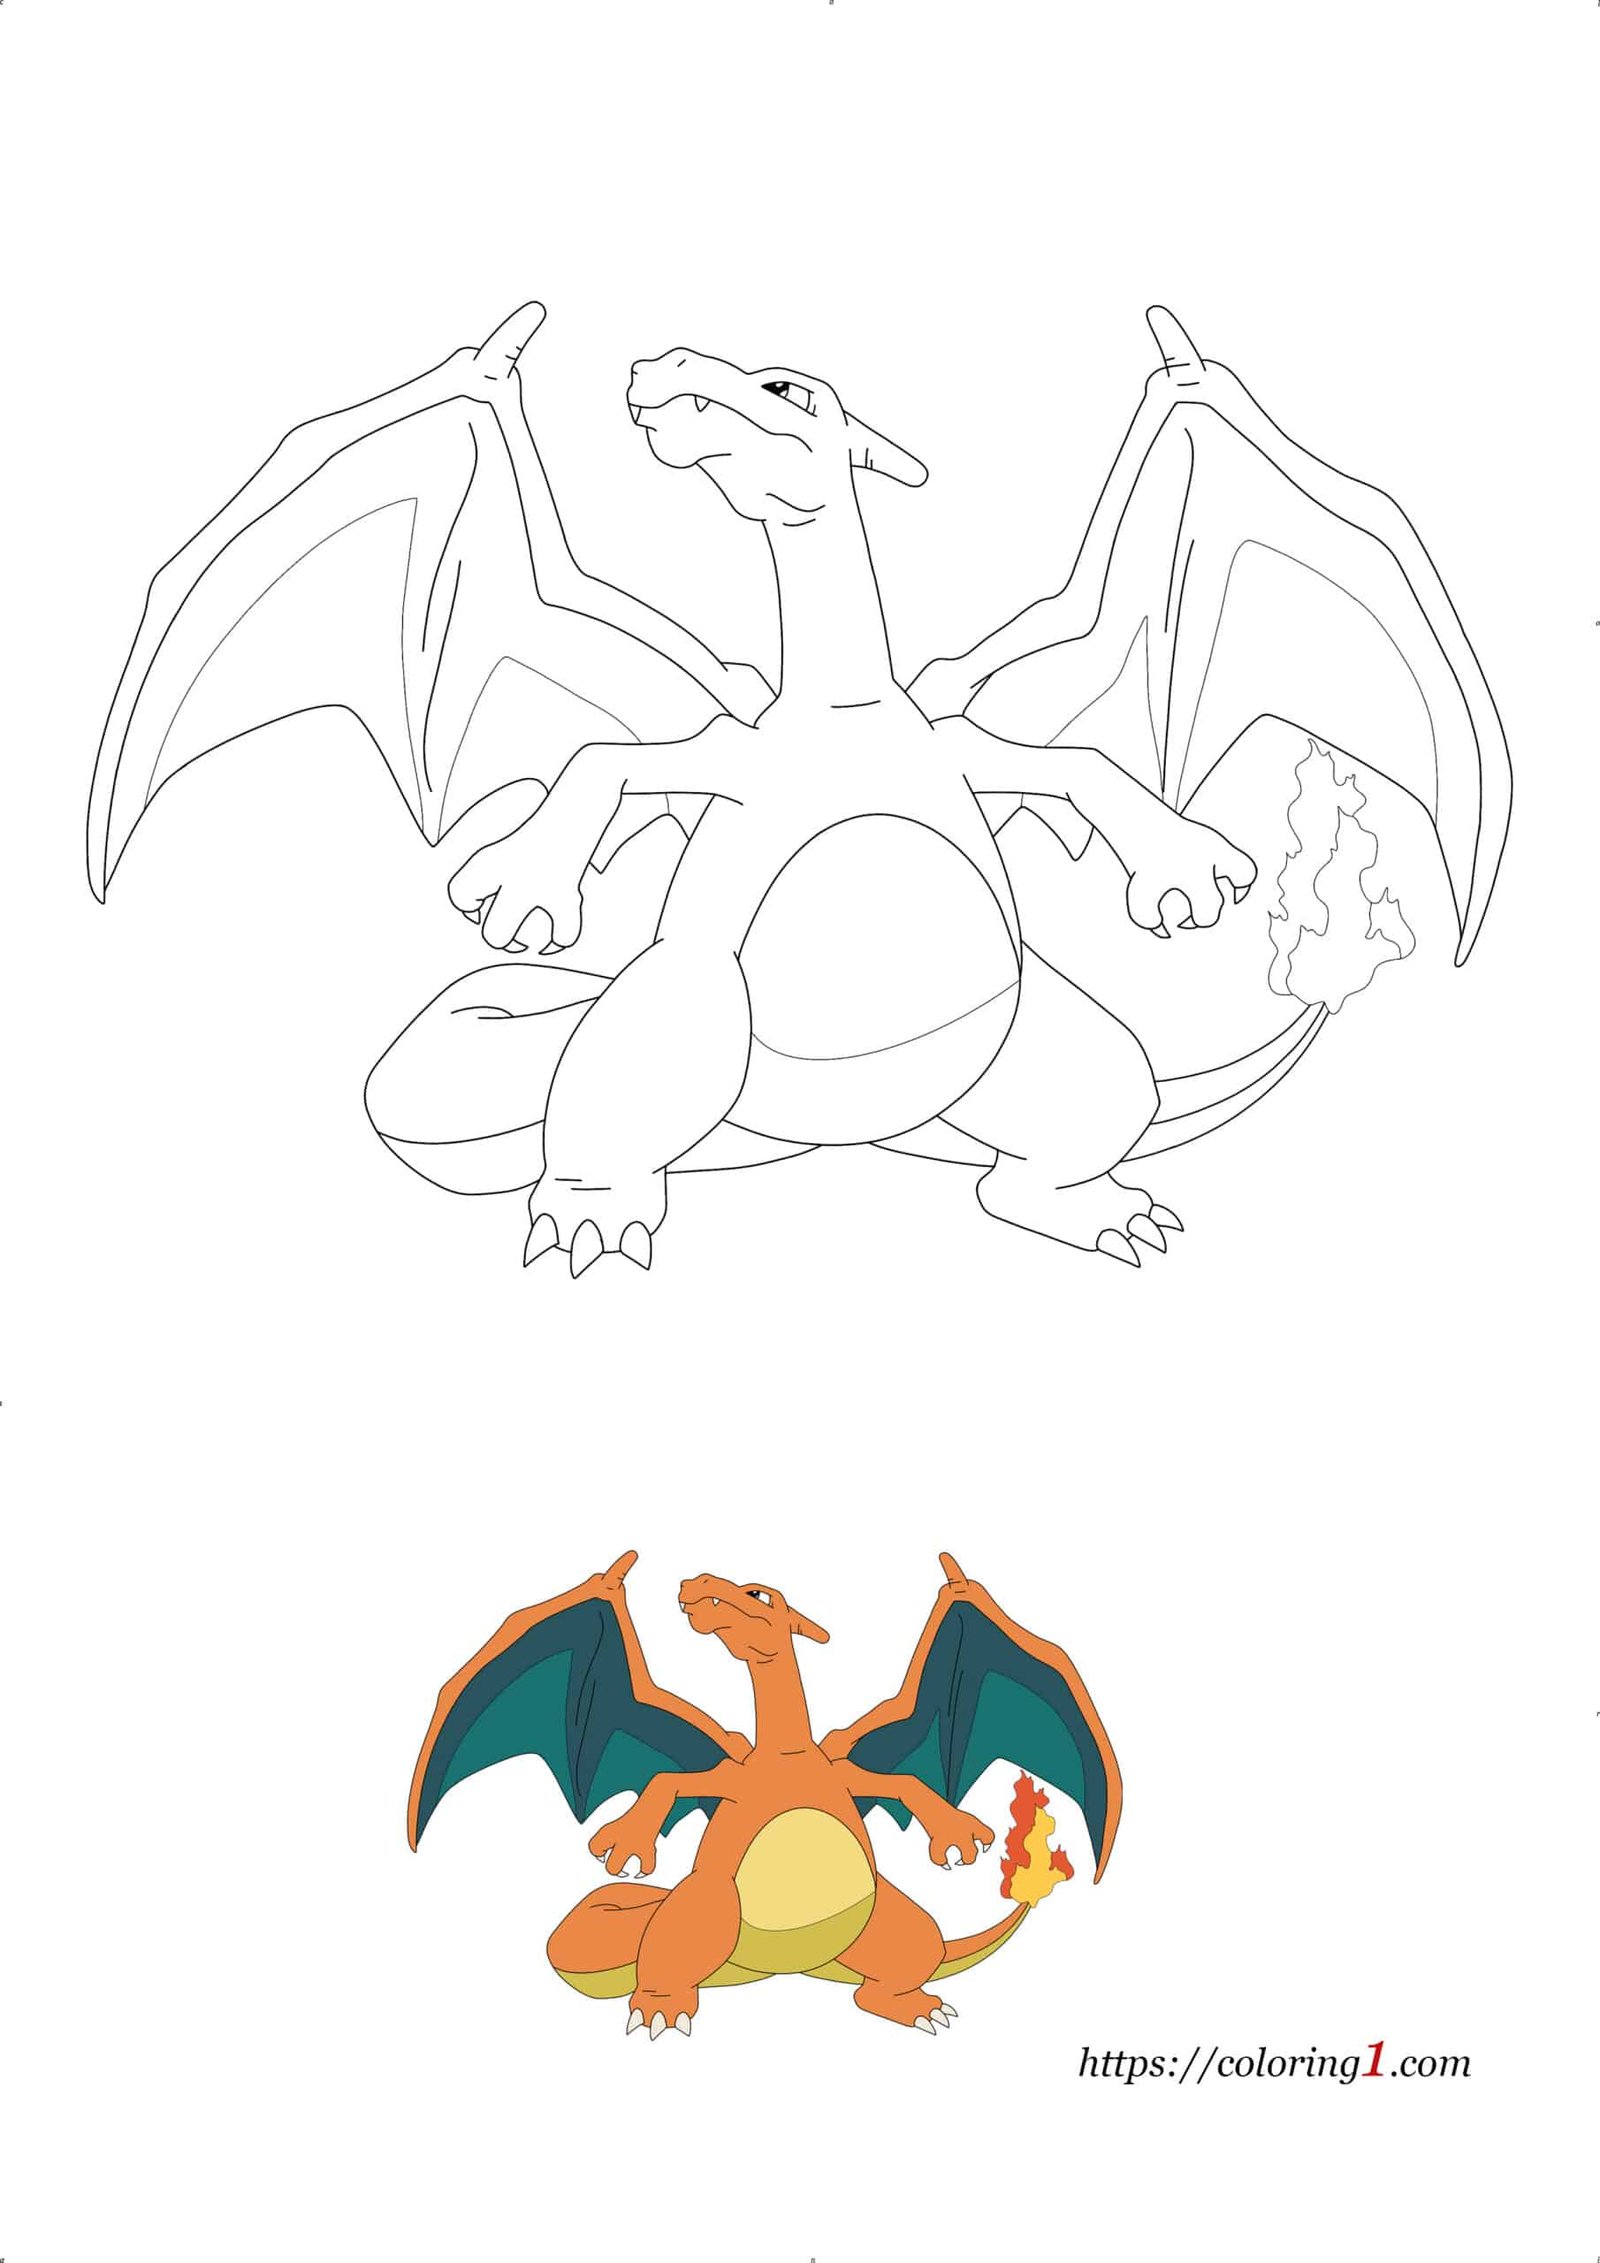 Pokemon Go Power of Charizard - Wallpaper - Image Chest - Free Image  Hosting And Sharing Made Easy